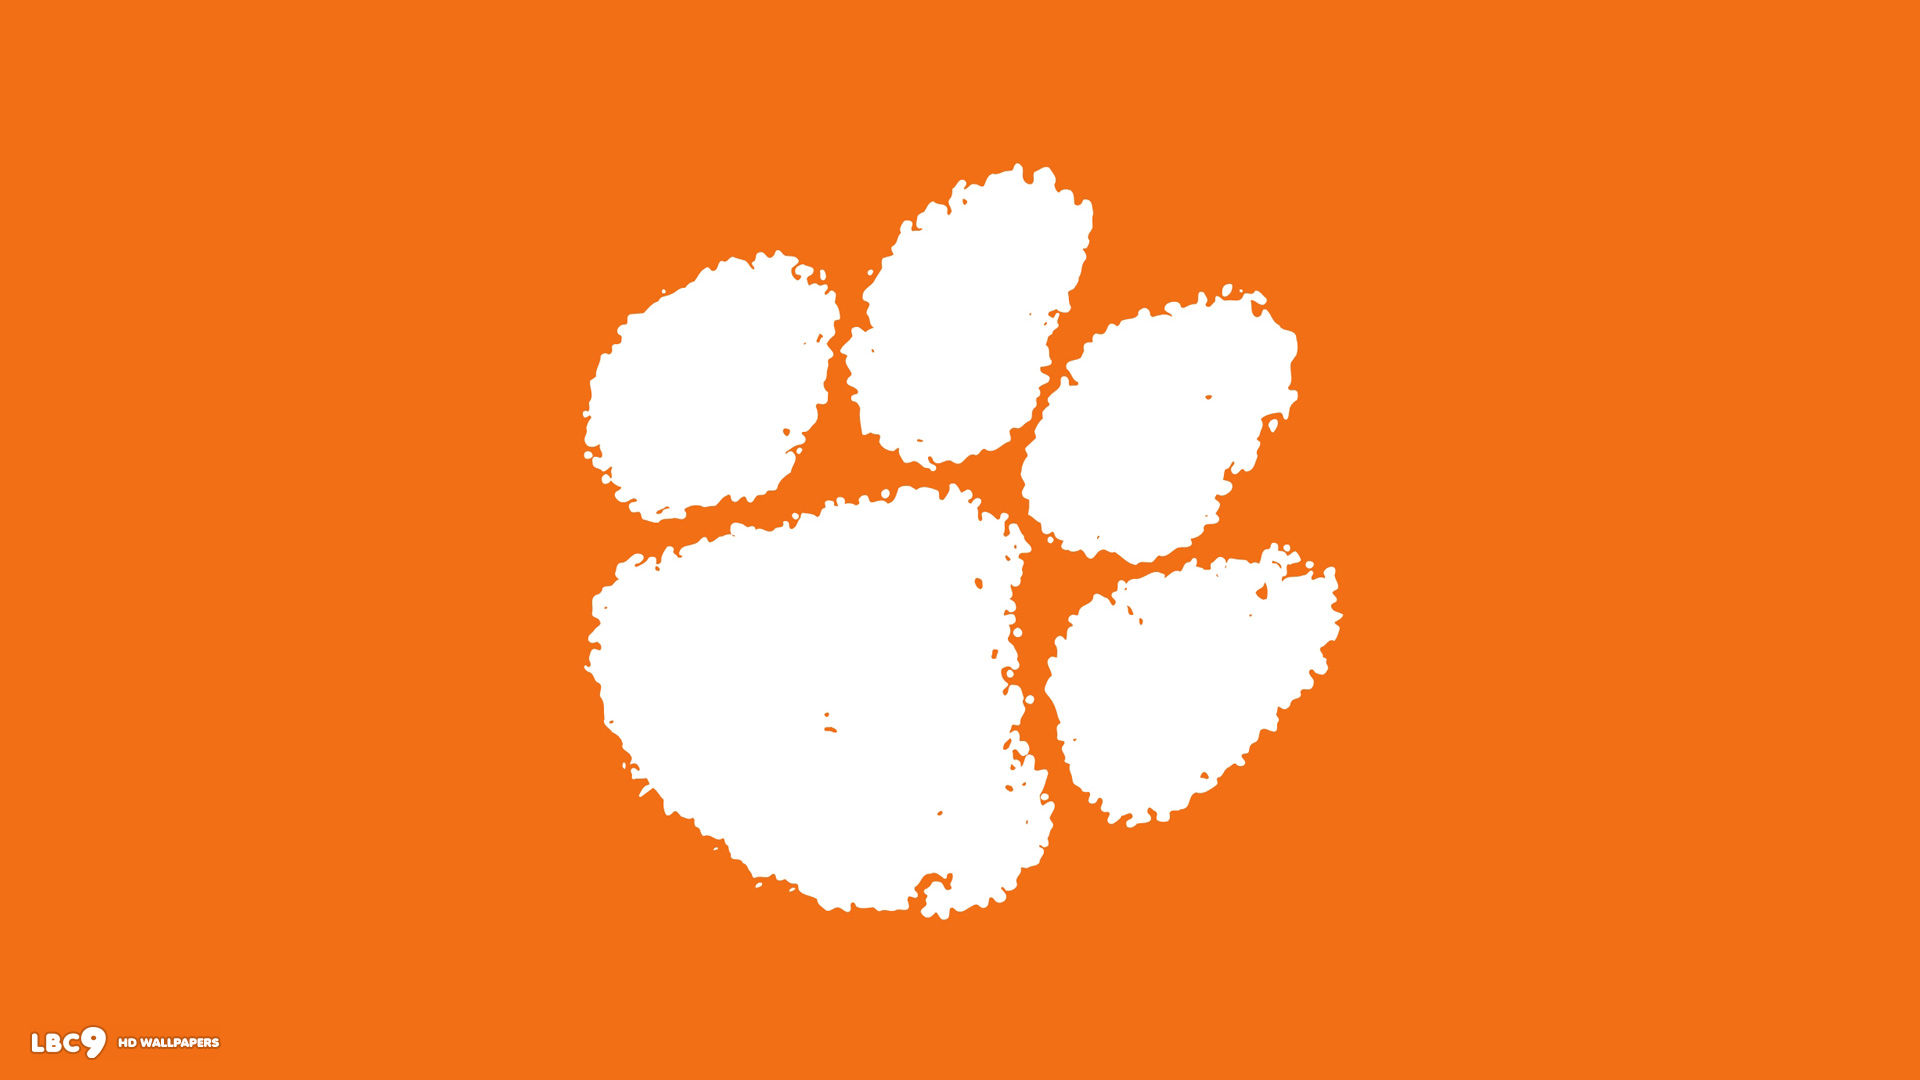 Clemson tigers wallpaper images cute Backgrounds